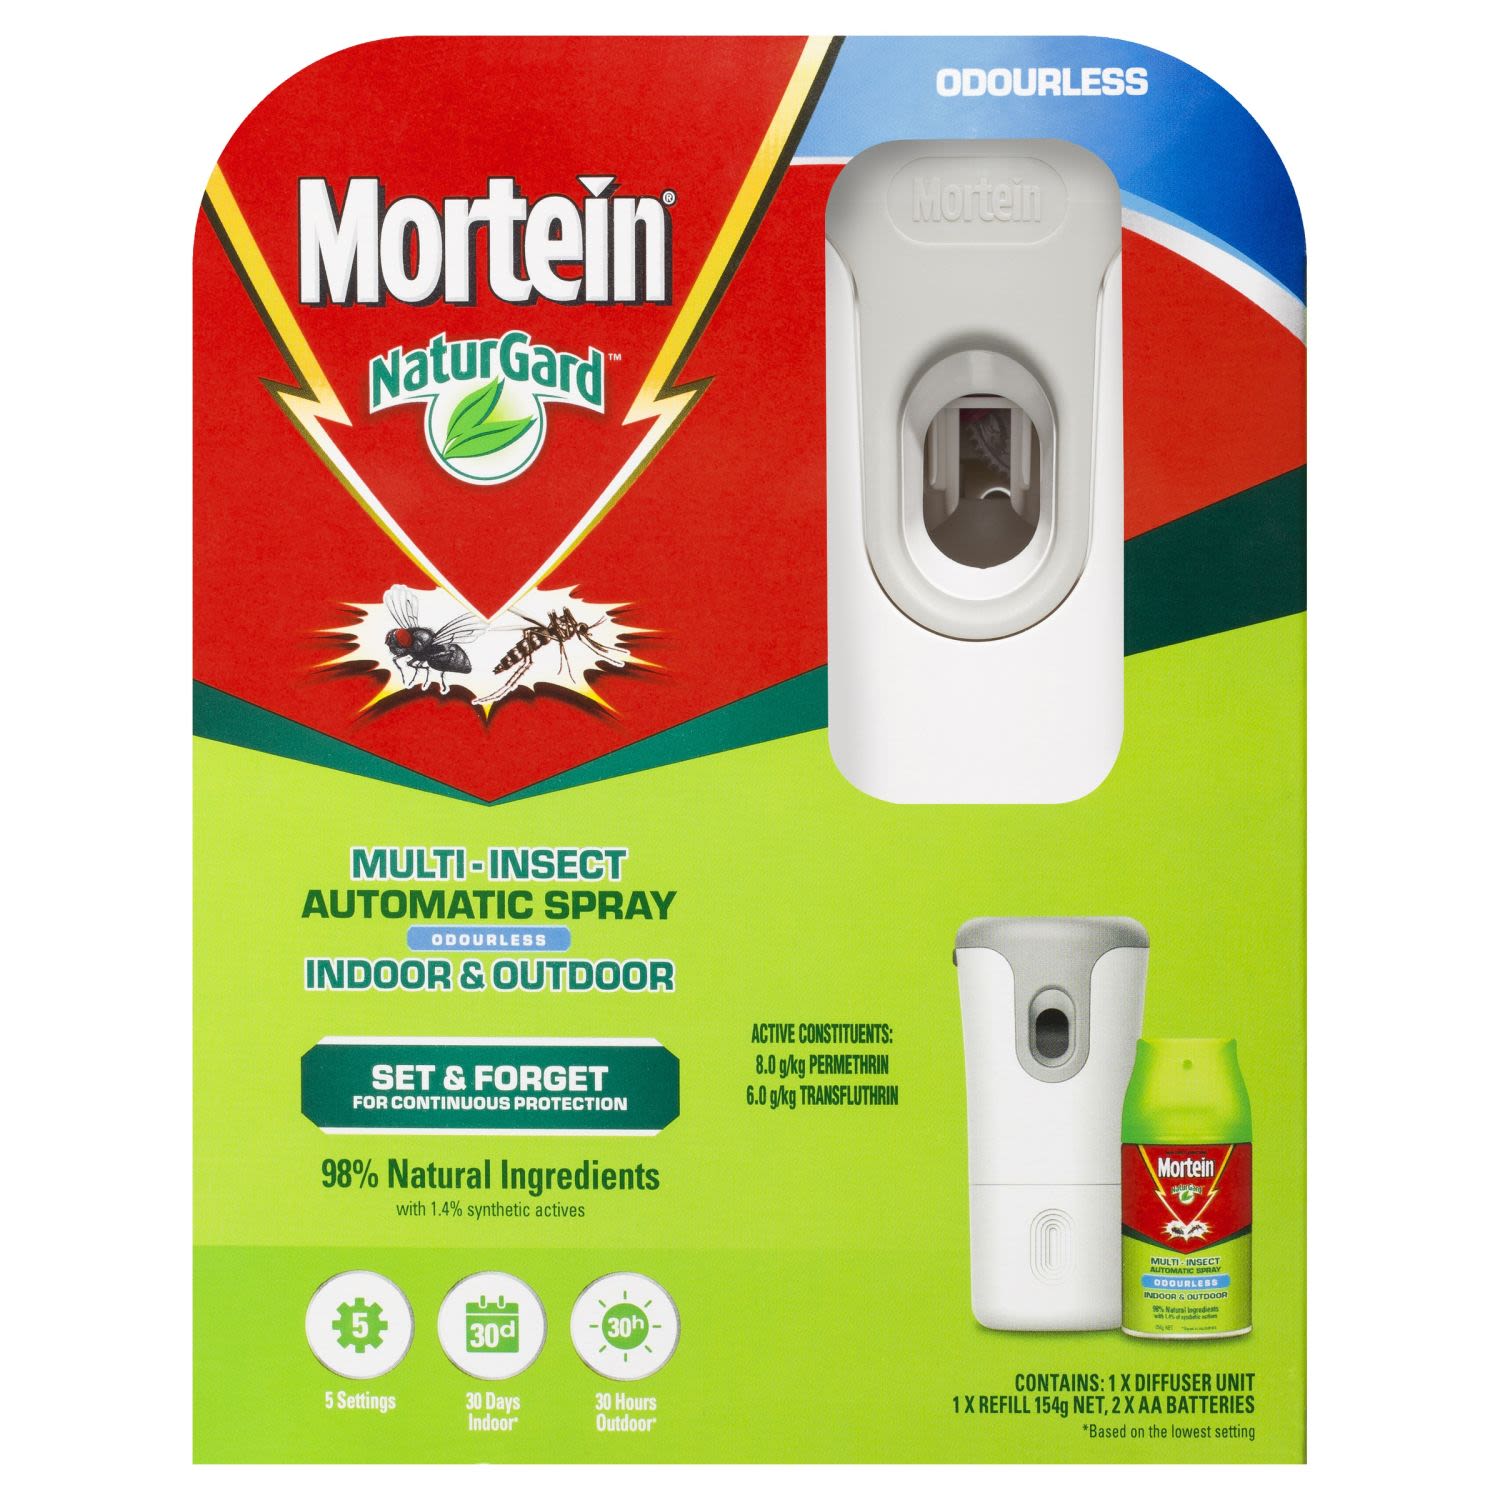 Mortein Naturgard Auto Indoor Insect Control System Odourless, 154 Gram